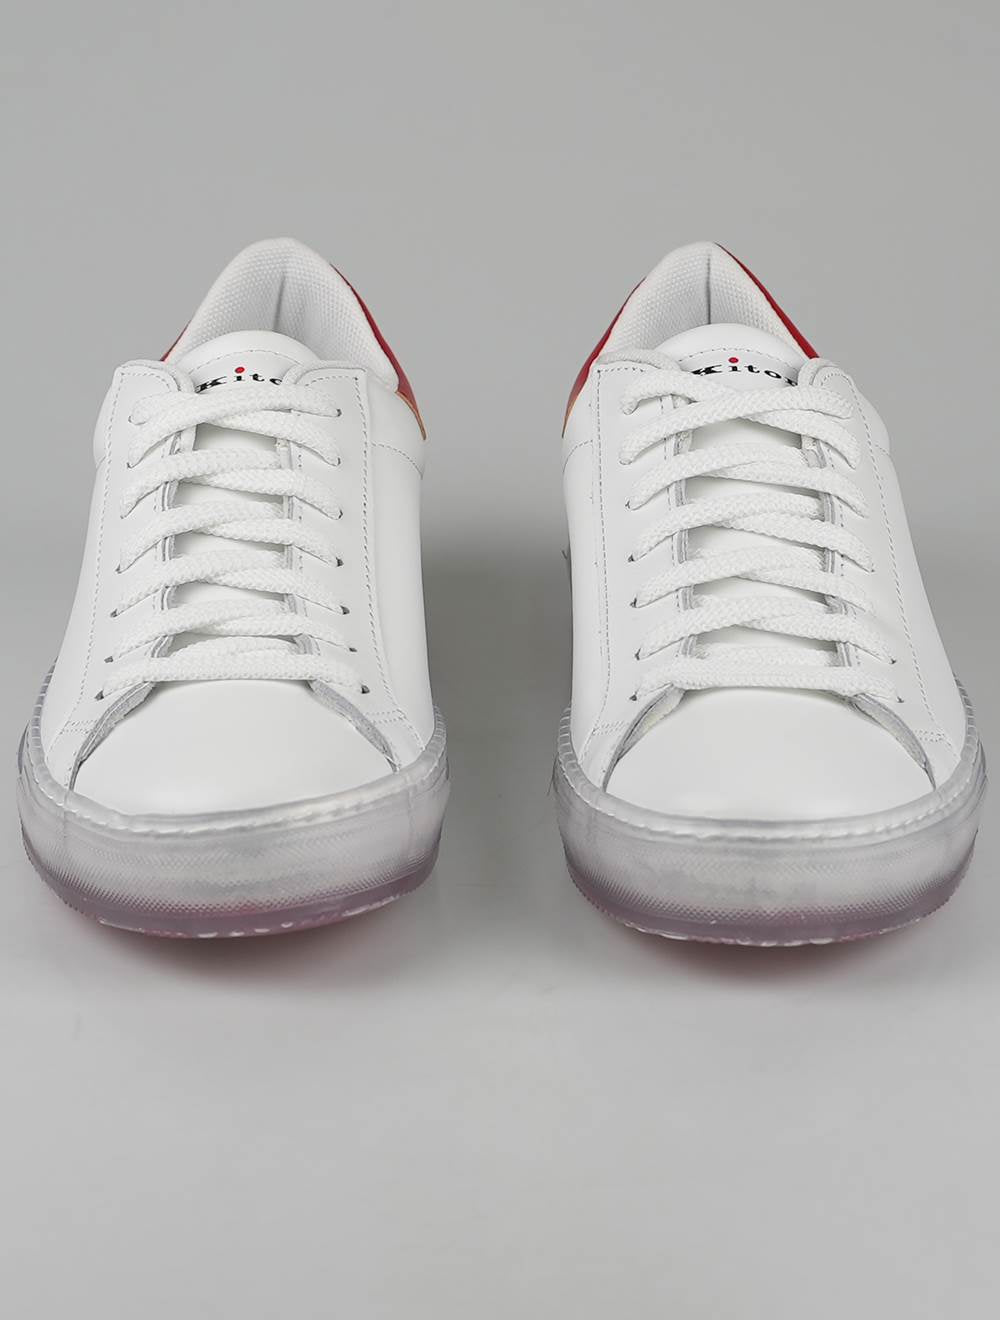 Kiton White Red Leather Sneakers Special Edition